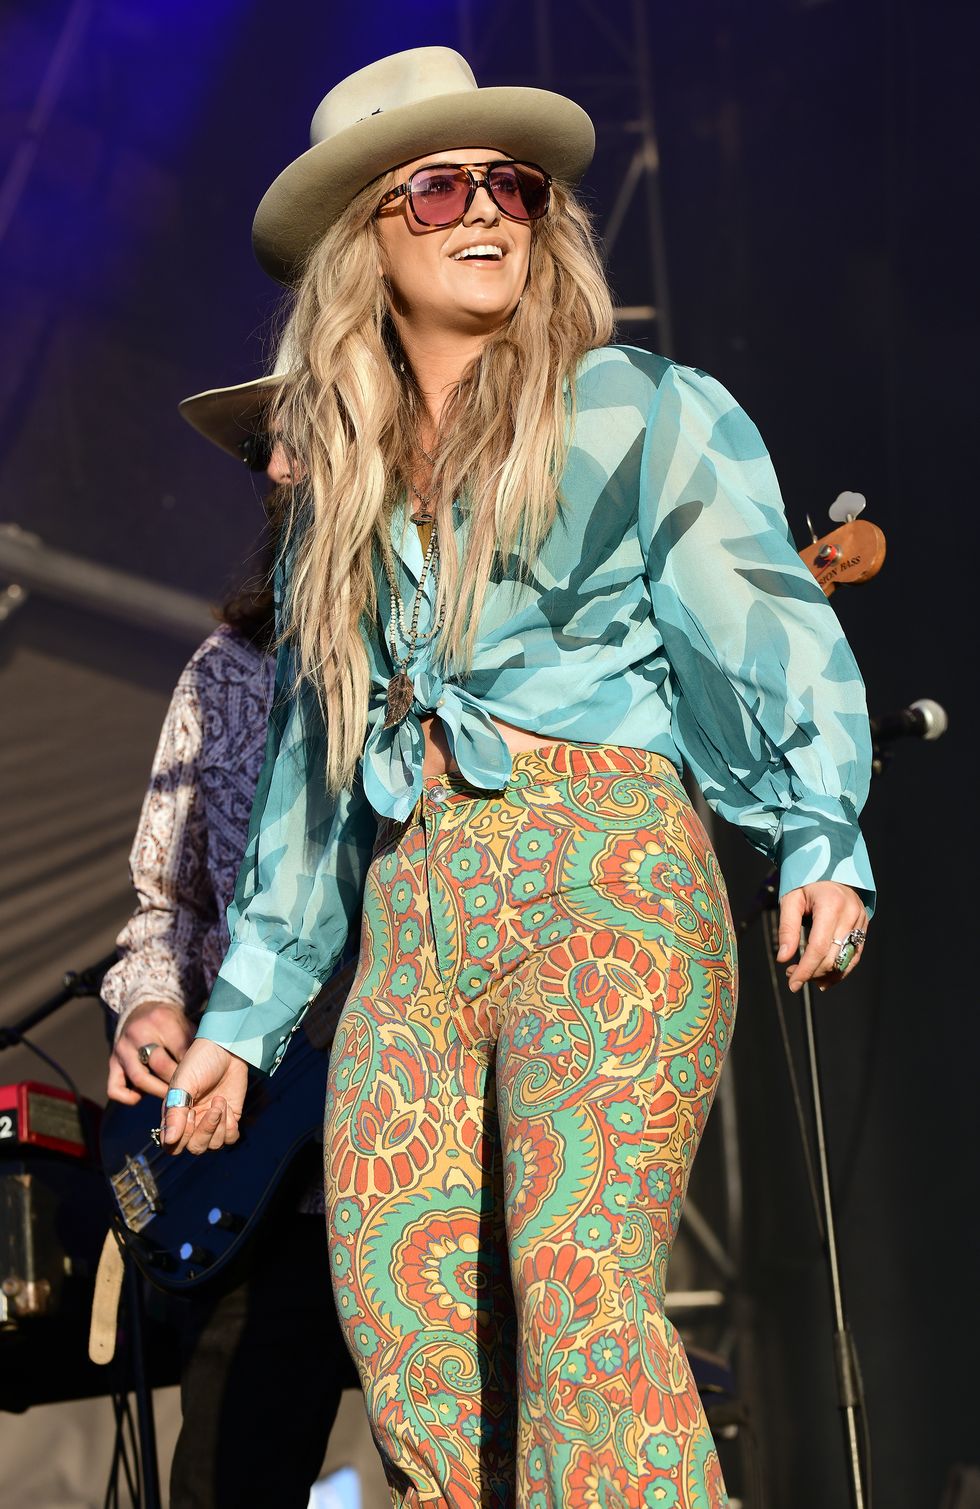 lainey wilson performs during the wonderfront music arts festival at seaport villiage on november 18, 2022 in san diego, california photo by tim mosenfeldergetty images